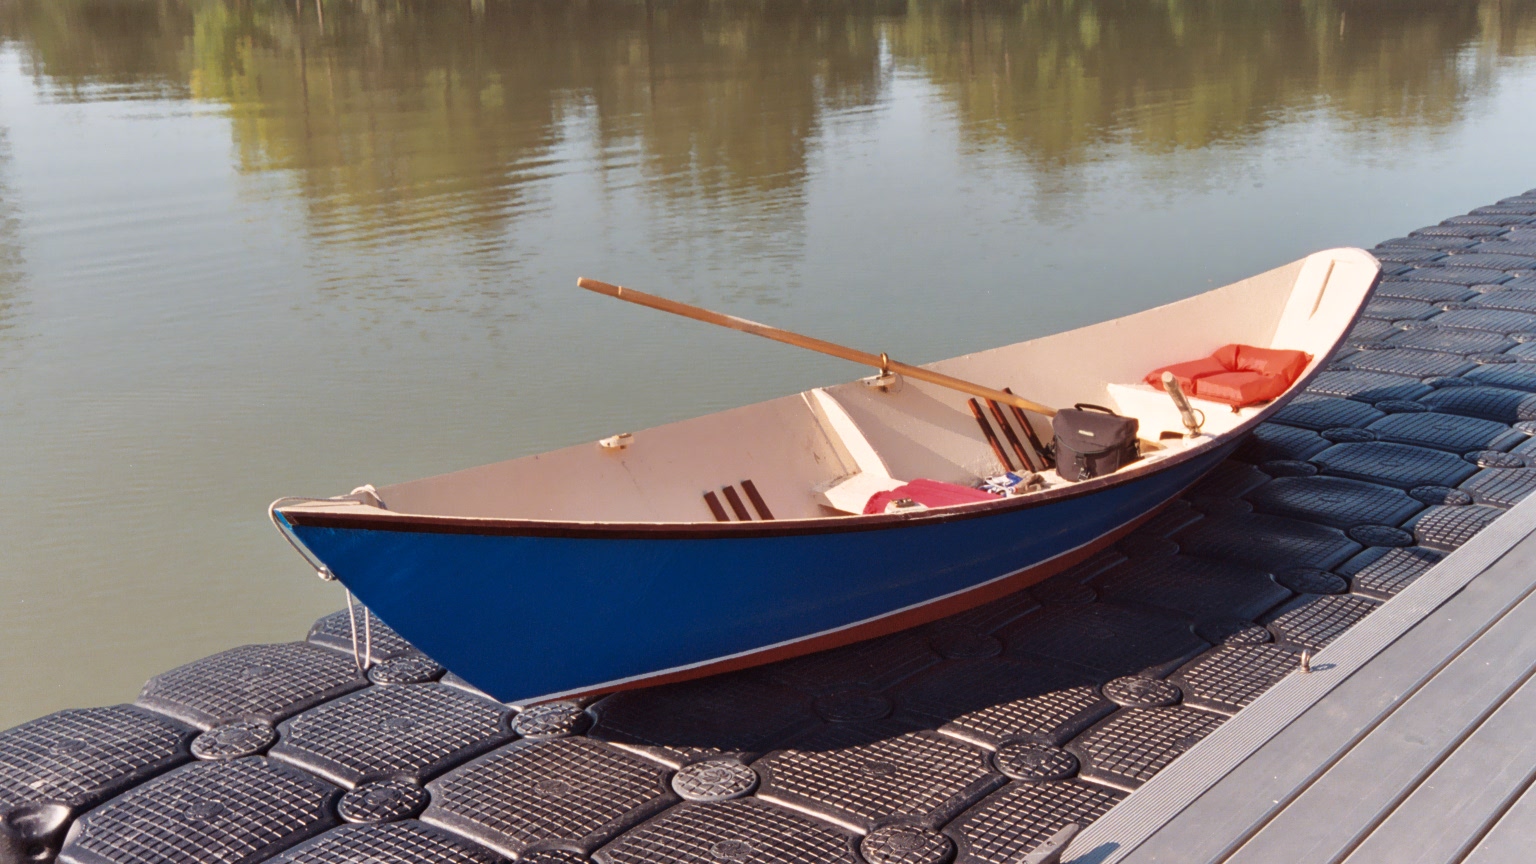  frequently built boat the gloucester light dory is a plywood classic